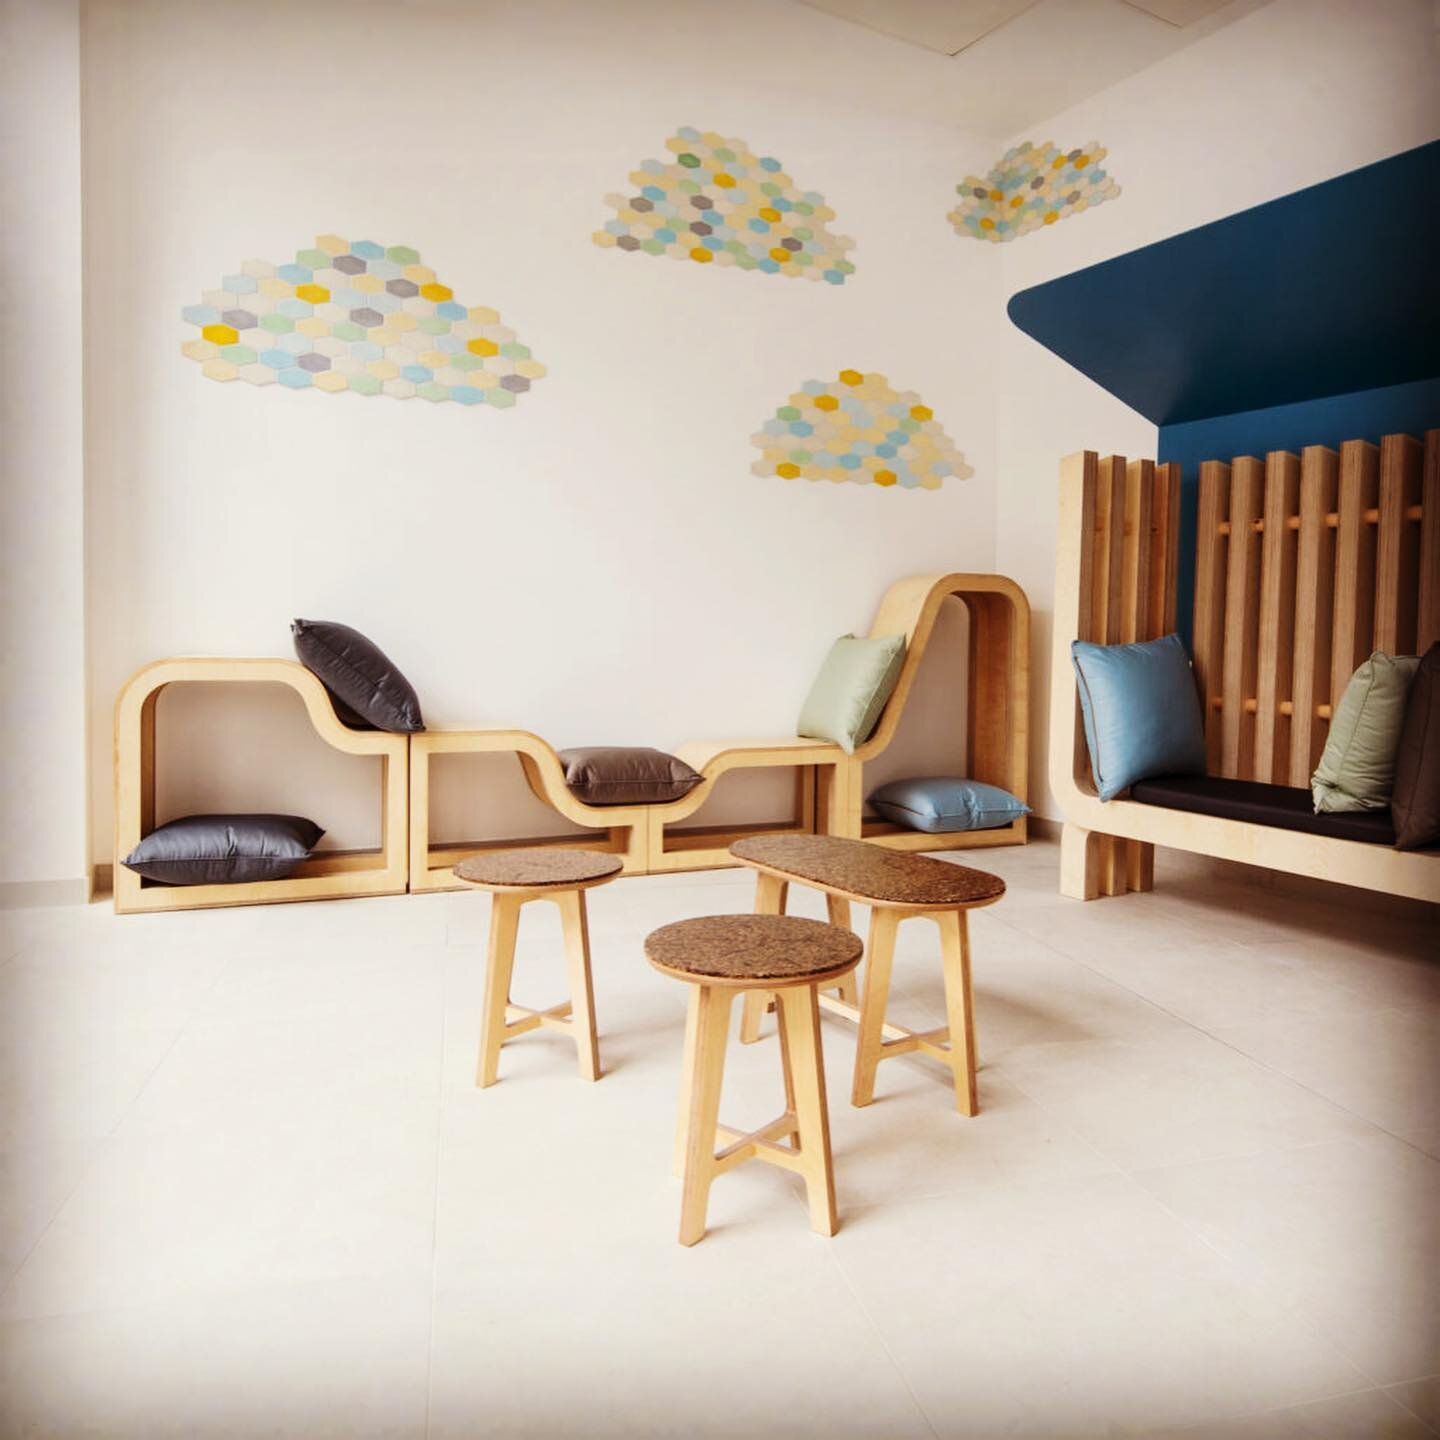 Delighted to announce .. My handmade tiles  made as part of @lindsayperth.artchunks artchunks public art commission at the East Lothian Community Hospital is up for a Scottish design award. 
The Sanctuary Room and Courtyard is one of five finalists i